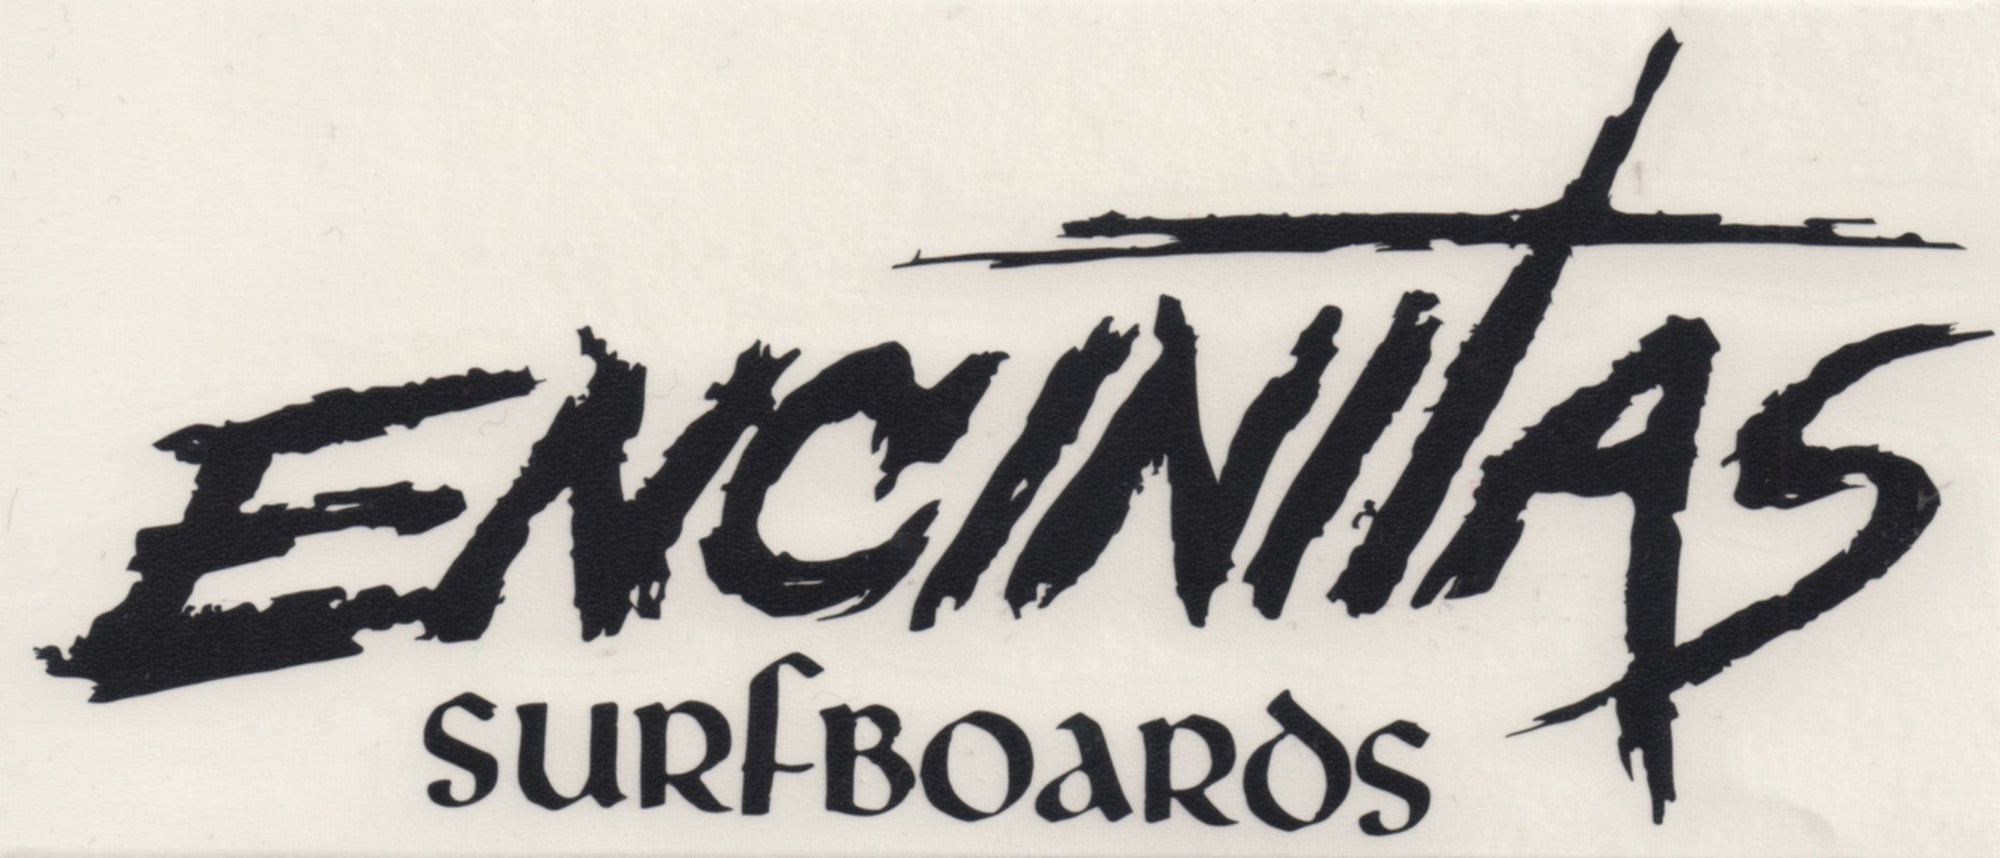 New Wave Logo Die Cut-Encinitas Surfboards-black,blue,dark,die cut,eighties,encinitas,encinitassurfboards,icon,local,logo,matte,new,red,silver,surfboards,wave,white